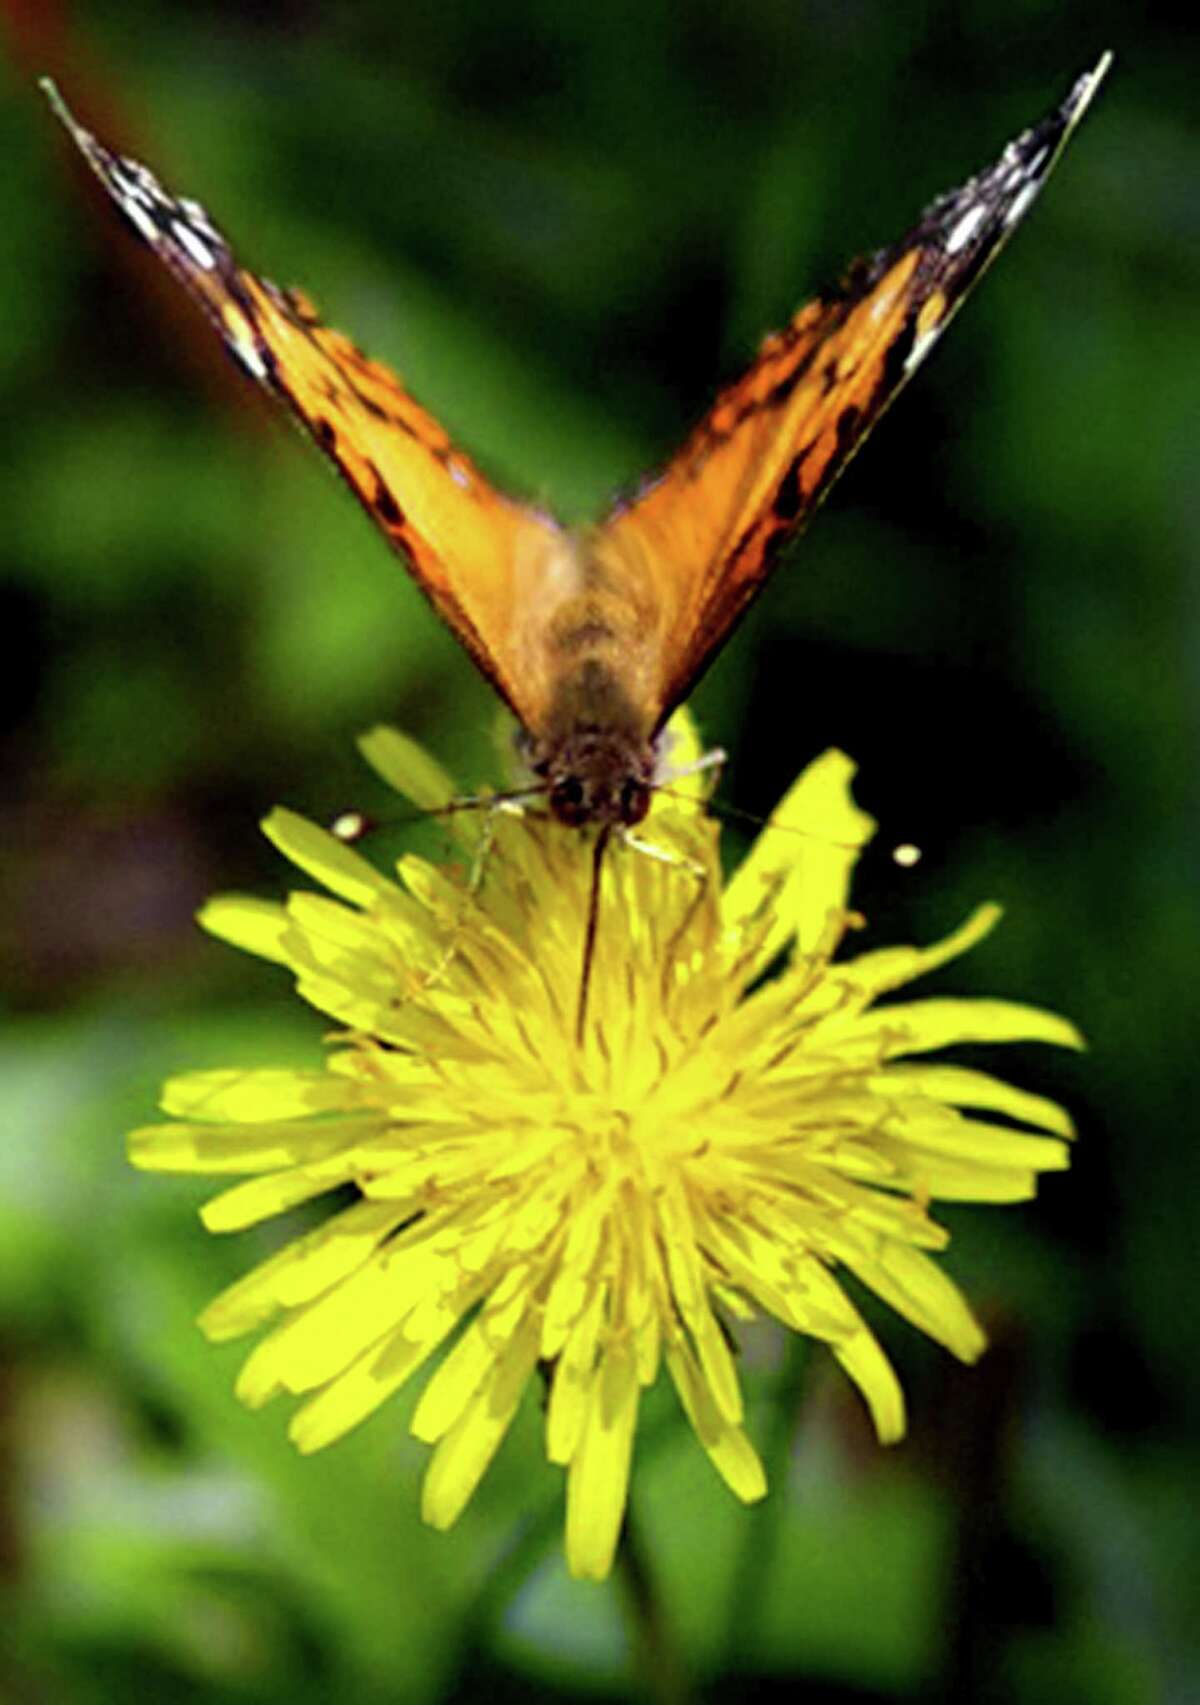 Nature's wonders abounded through 2012 in the Greater New Milford area and none more beautiful than the image of a butterfly lighting on a dandelion in May.